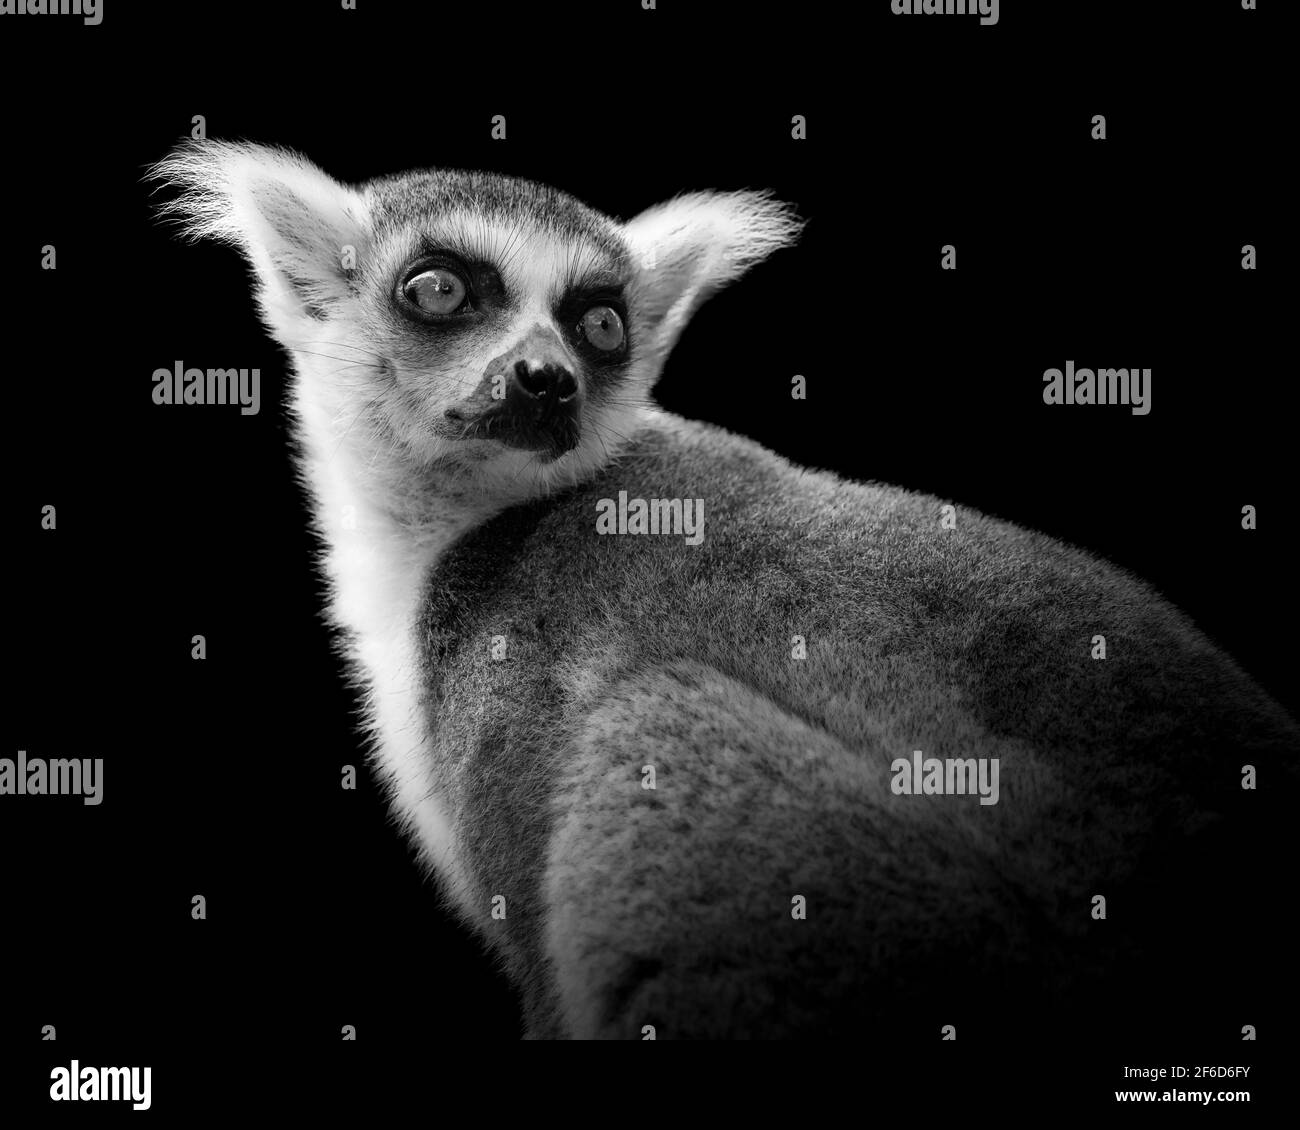 Portrait of a ringtailed lemur looking over its shoulder in a black and white image Stock Photo